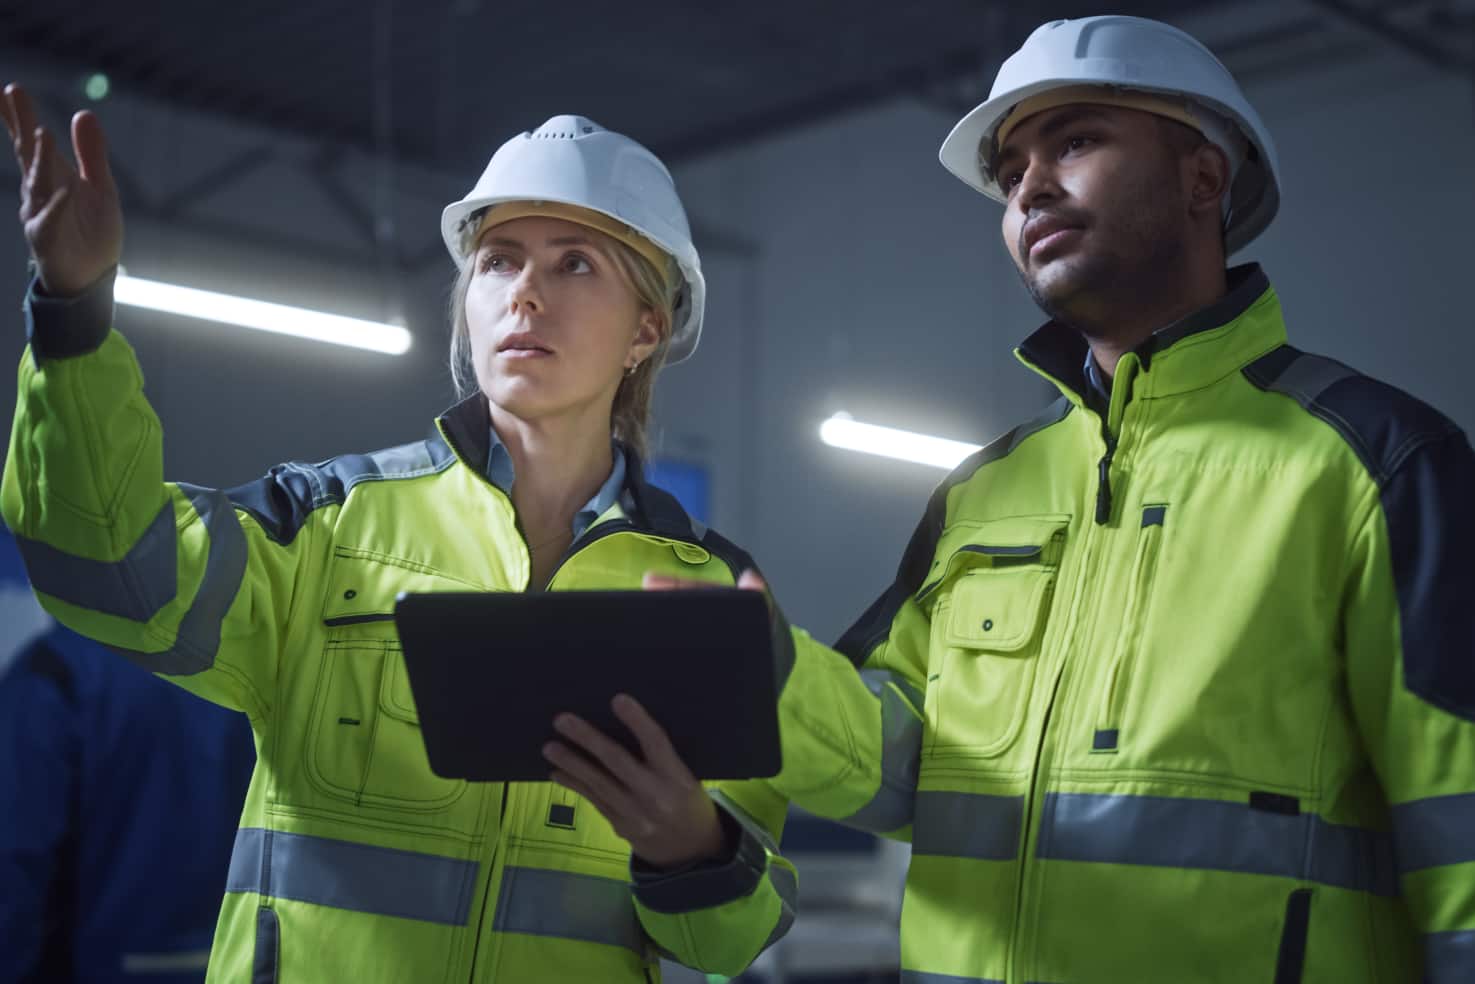 Lady engineer Explaining task with tablet in hand to Male engineer in company